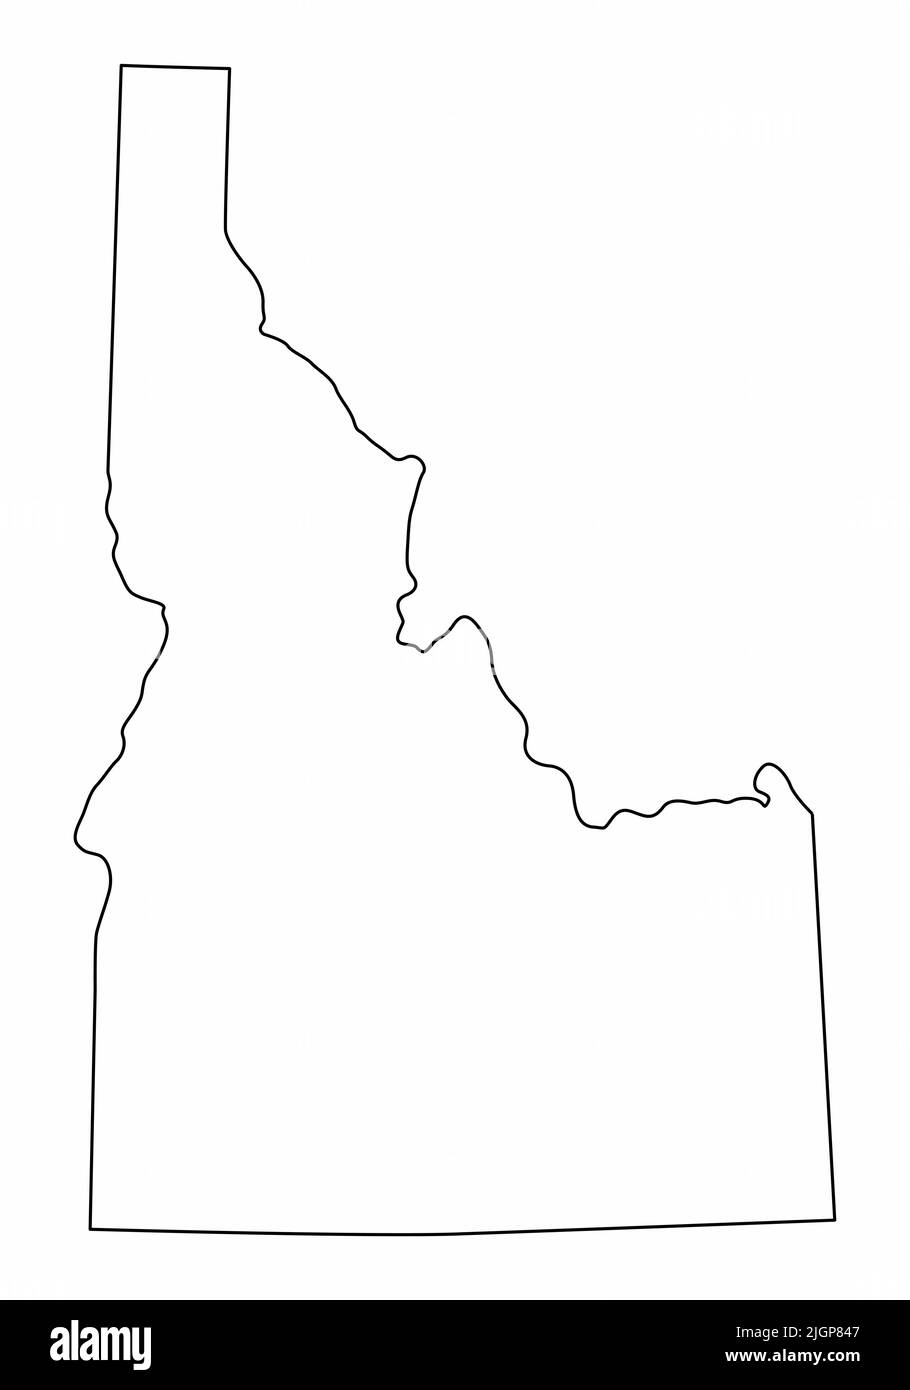 Idaho State isolated map. Black outlines on white background. Stock Vector